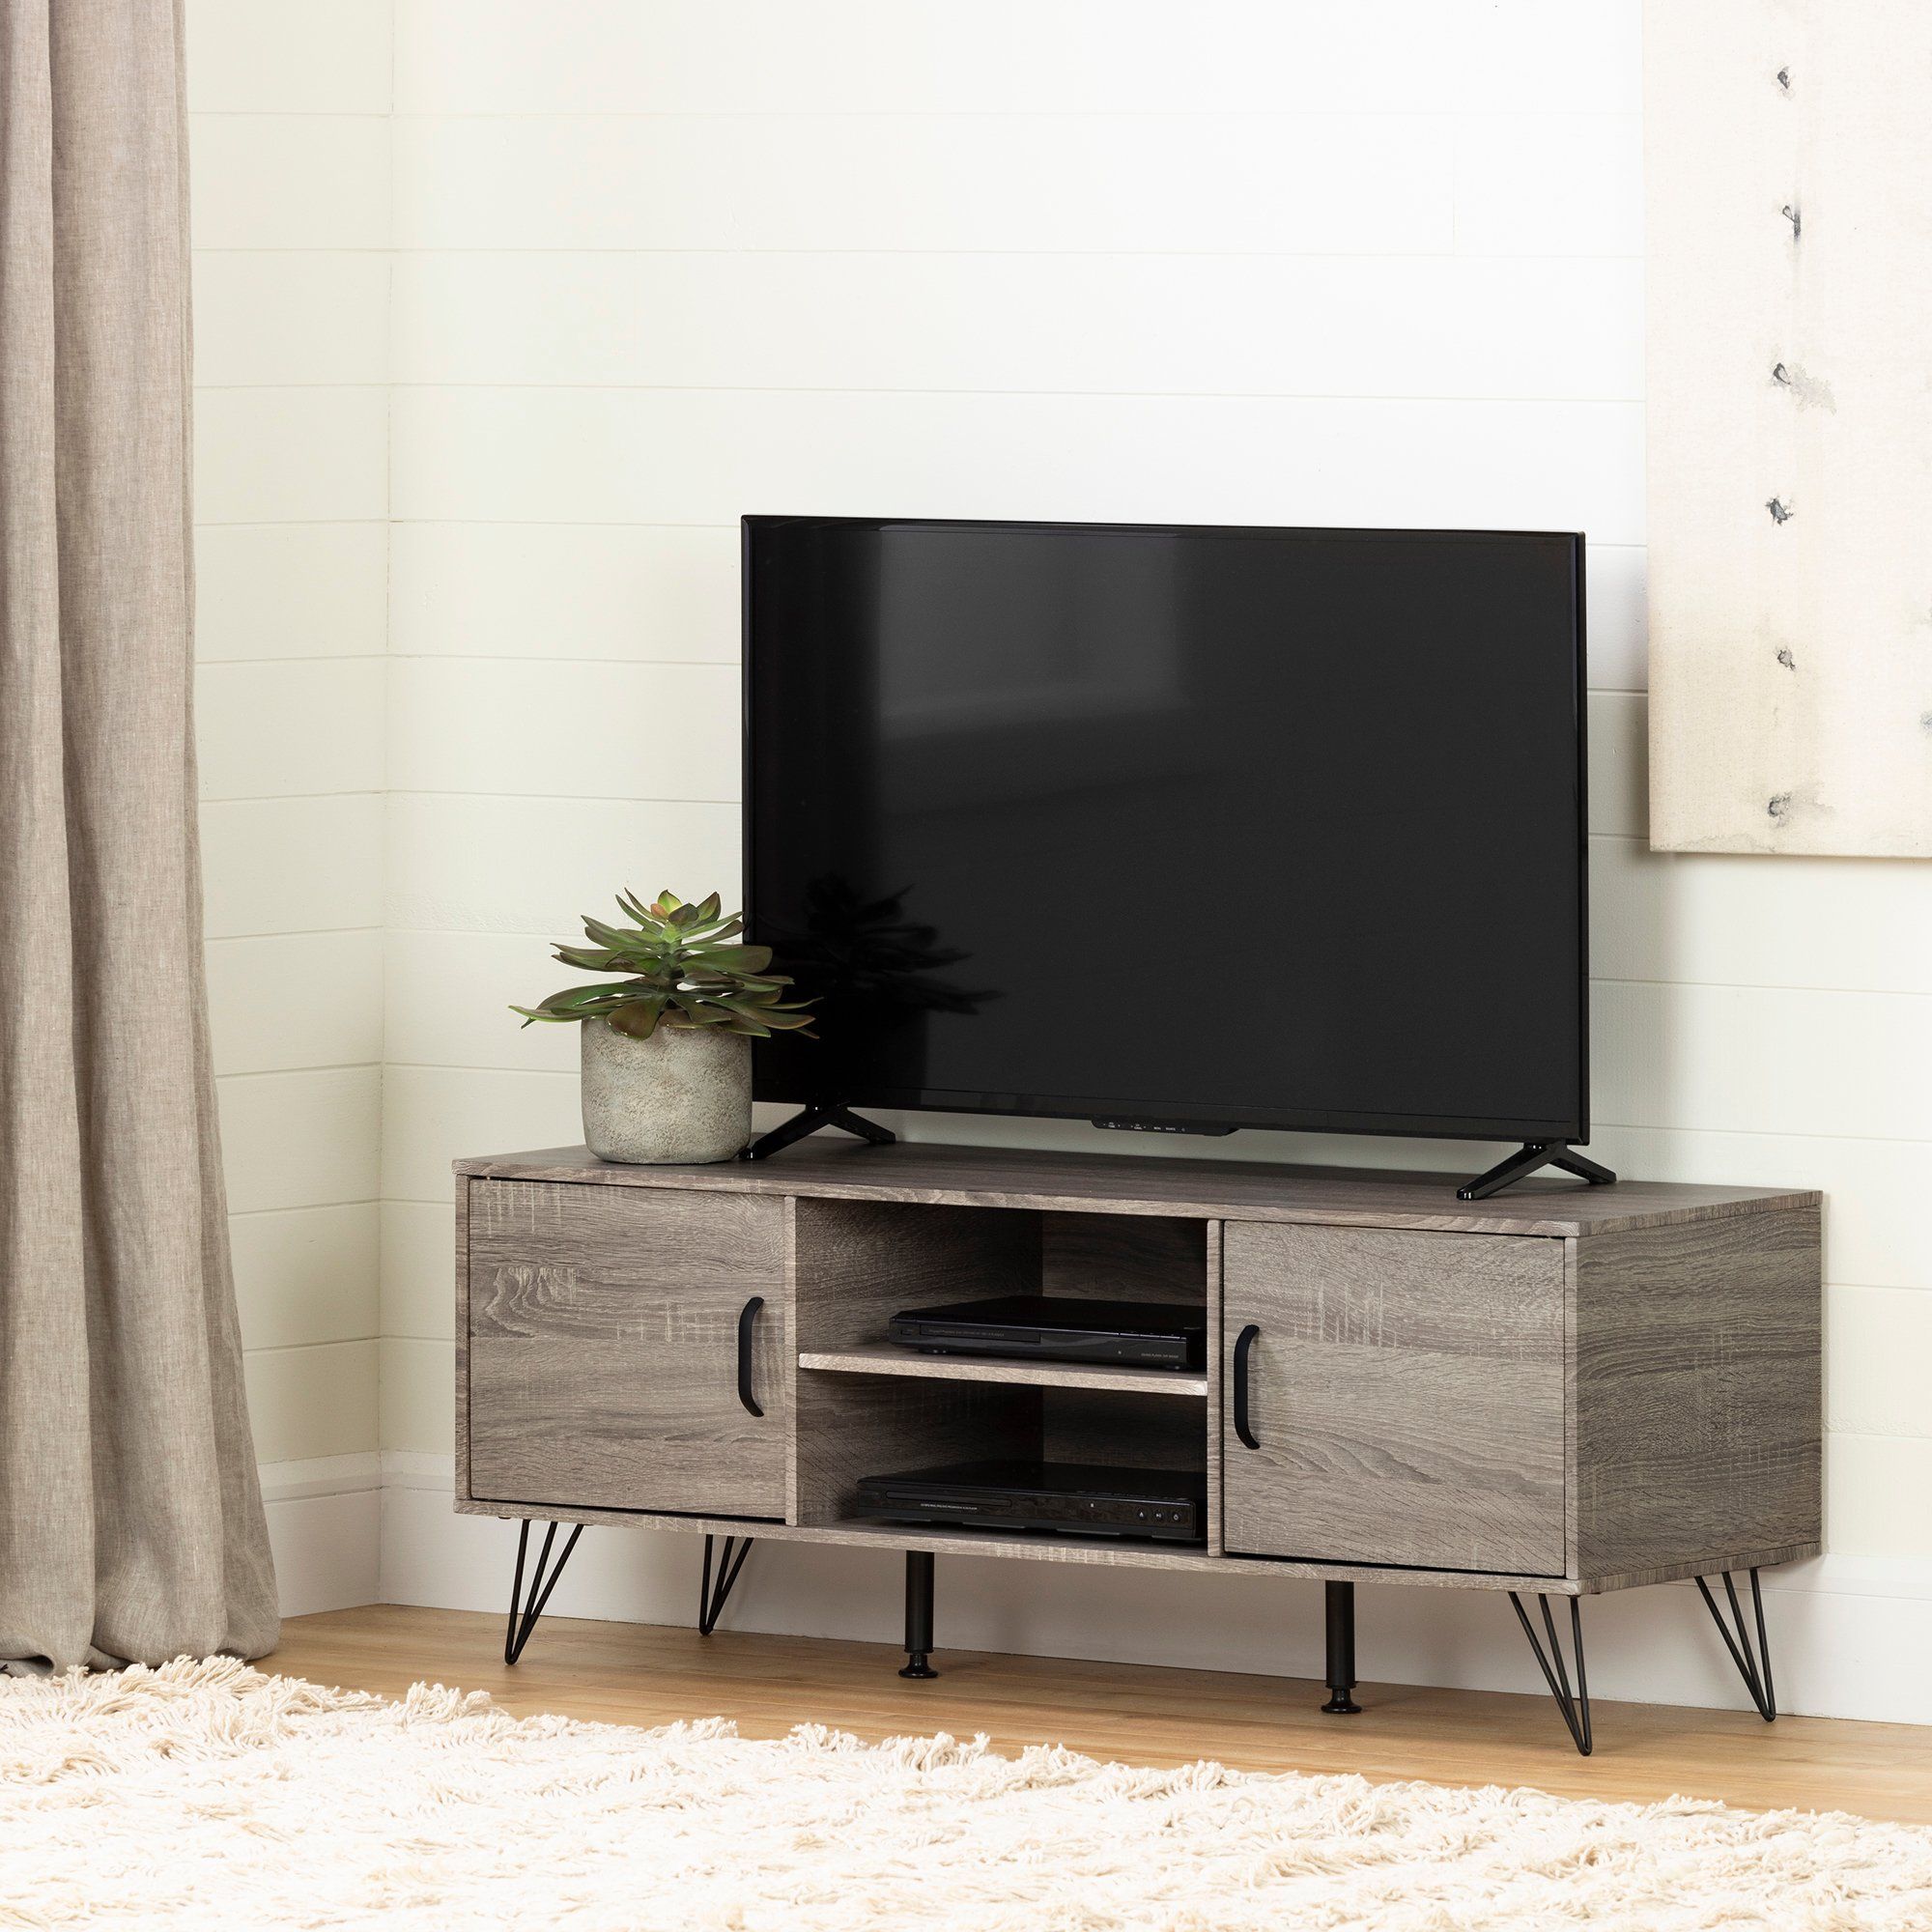 47 Inch Oak Caramel Tv Stand With Doors – Evane In 2020 In South Shore Evane Tv Stands With Doors In Oak Camel (View 5 of 15)